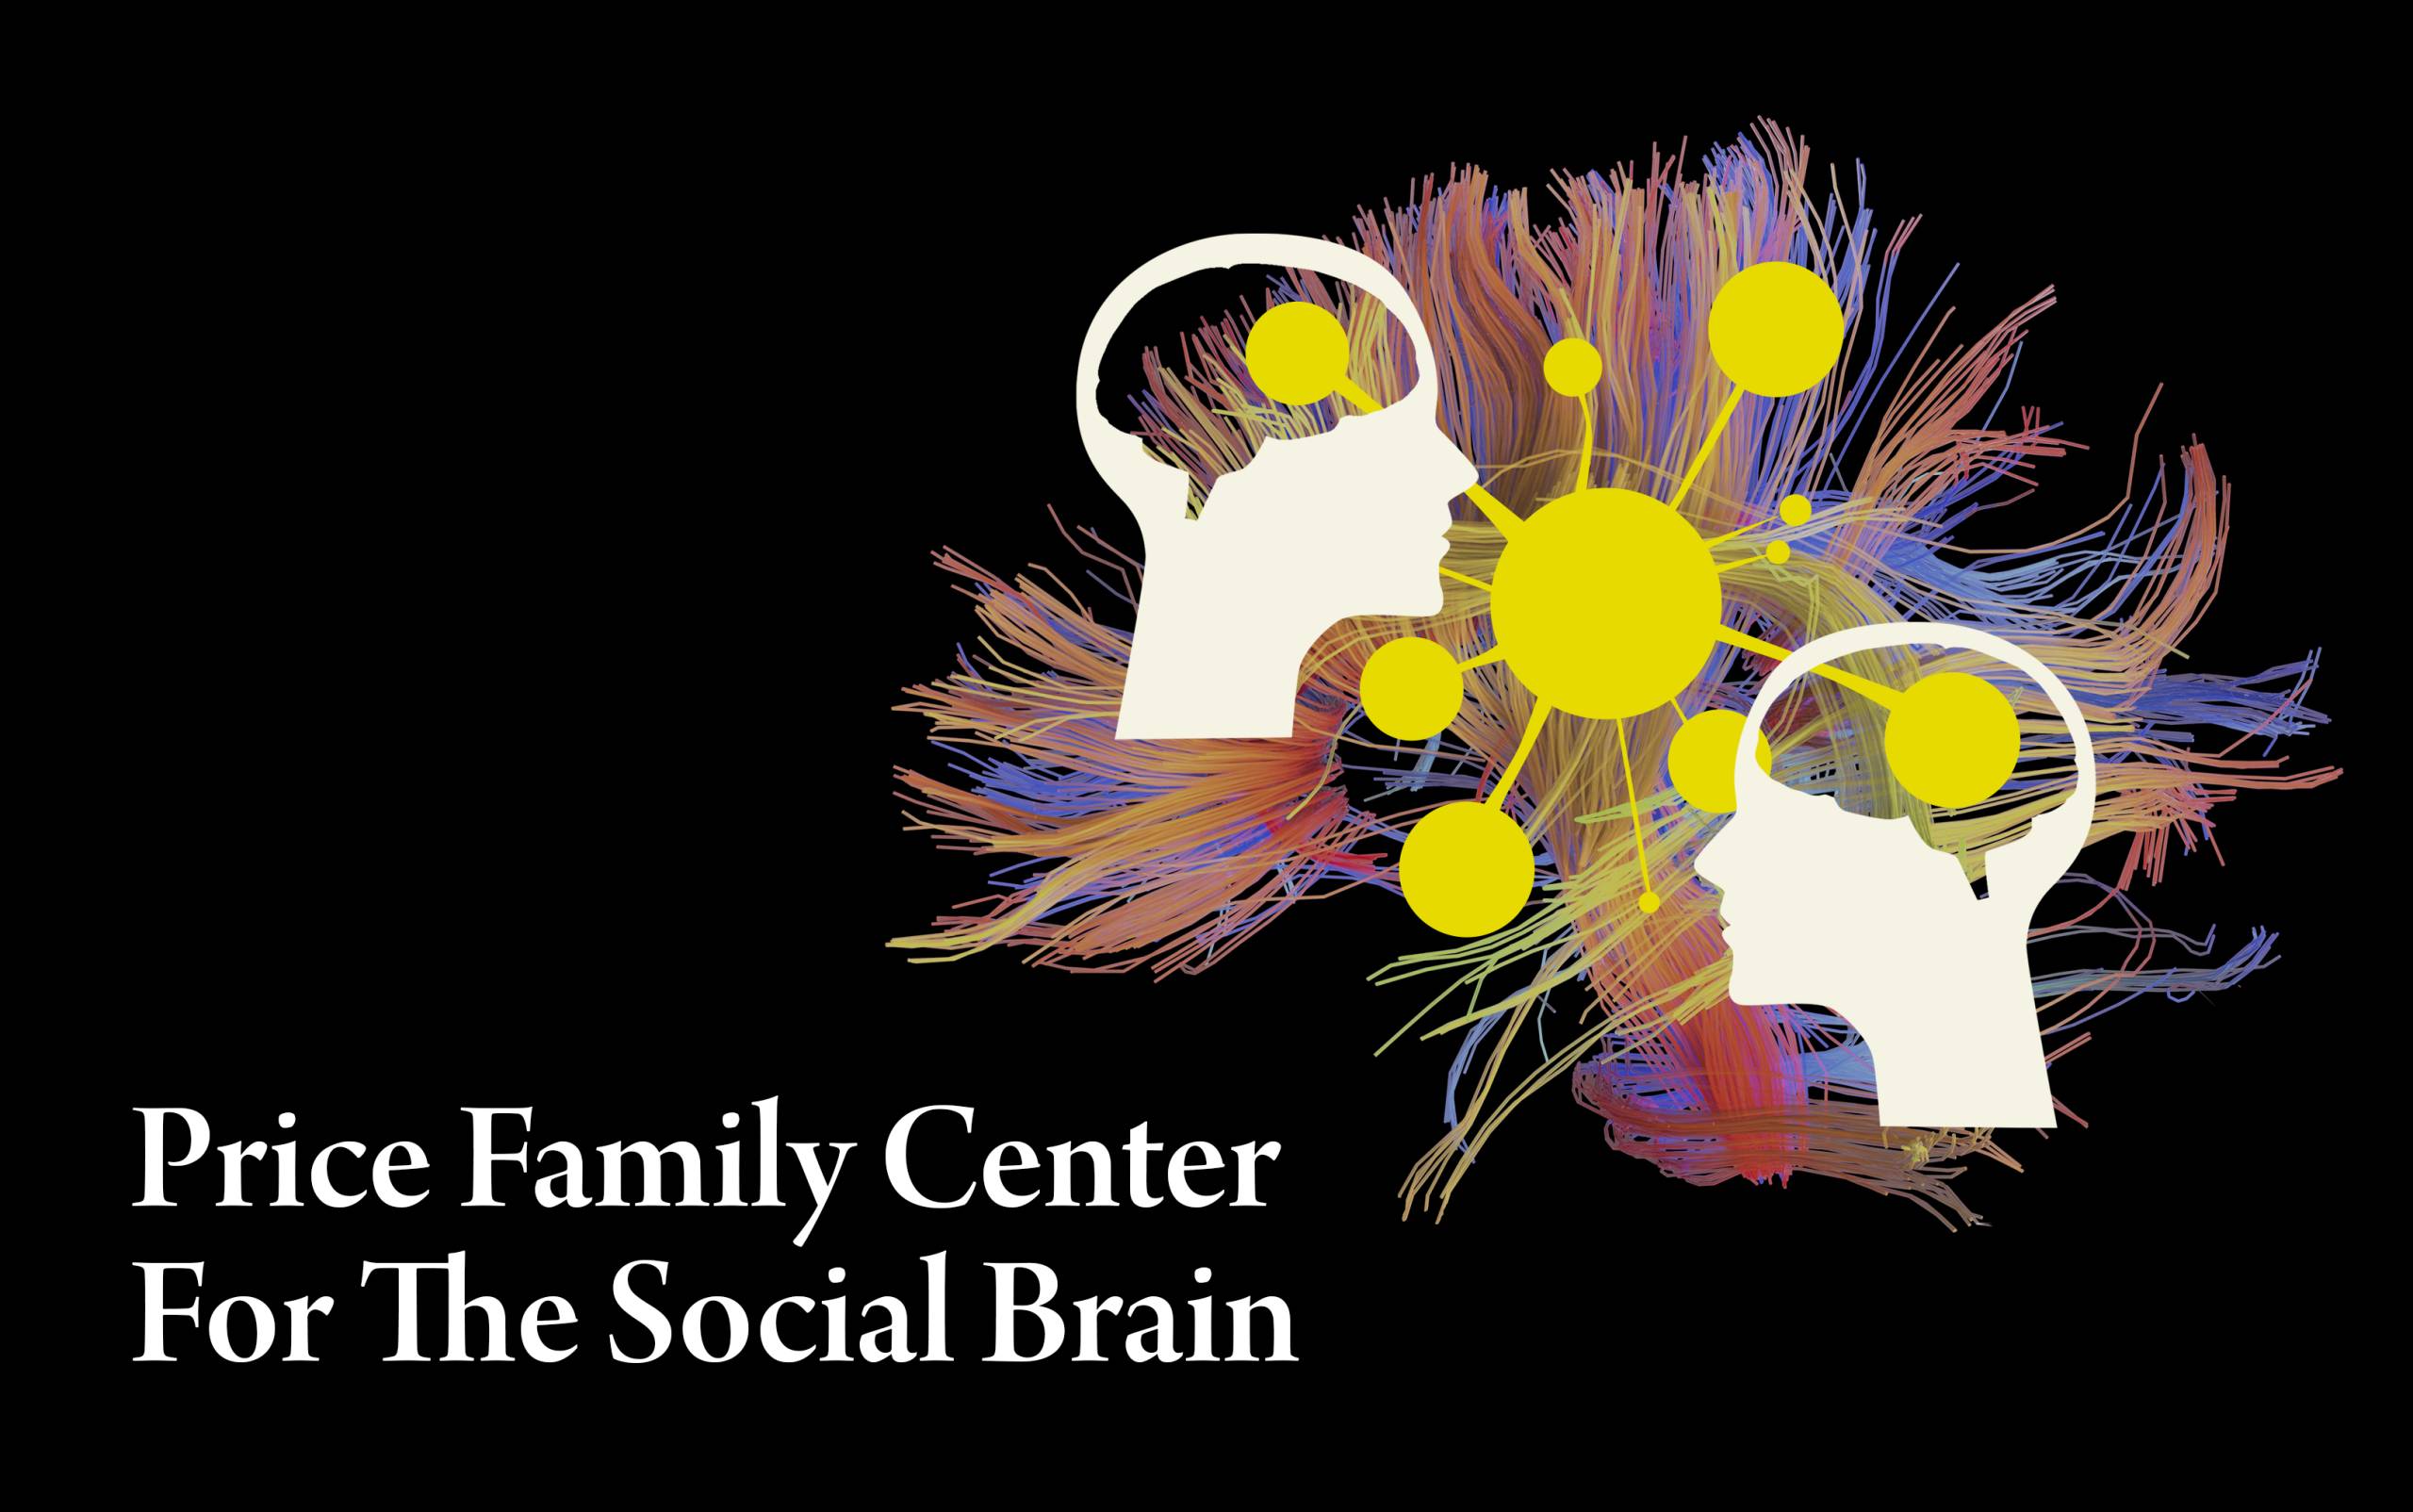 Price Family Center for the Social Brain Inaugural Symposium